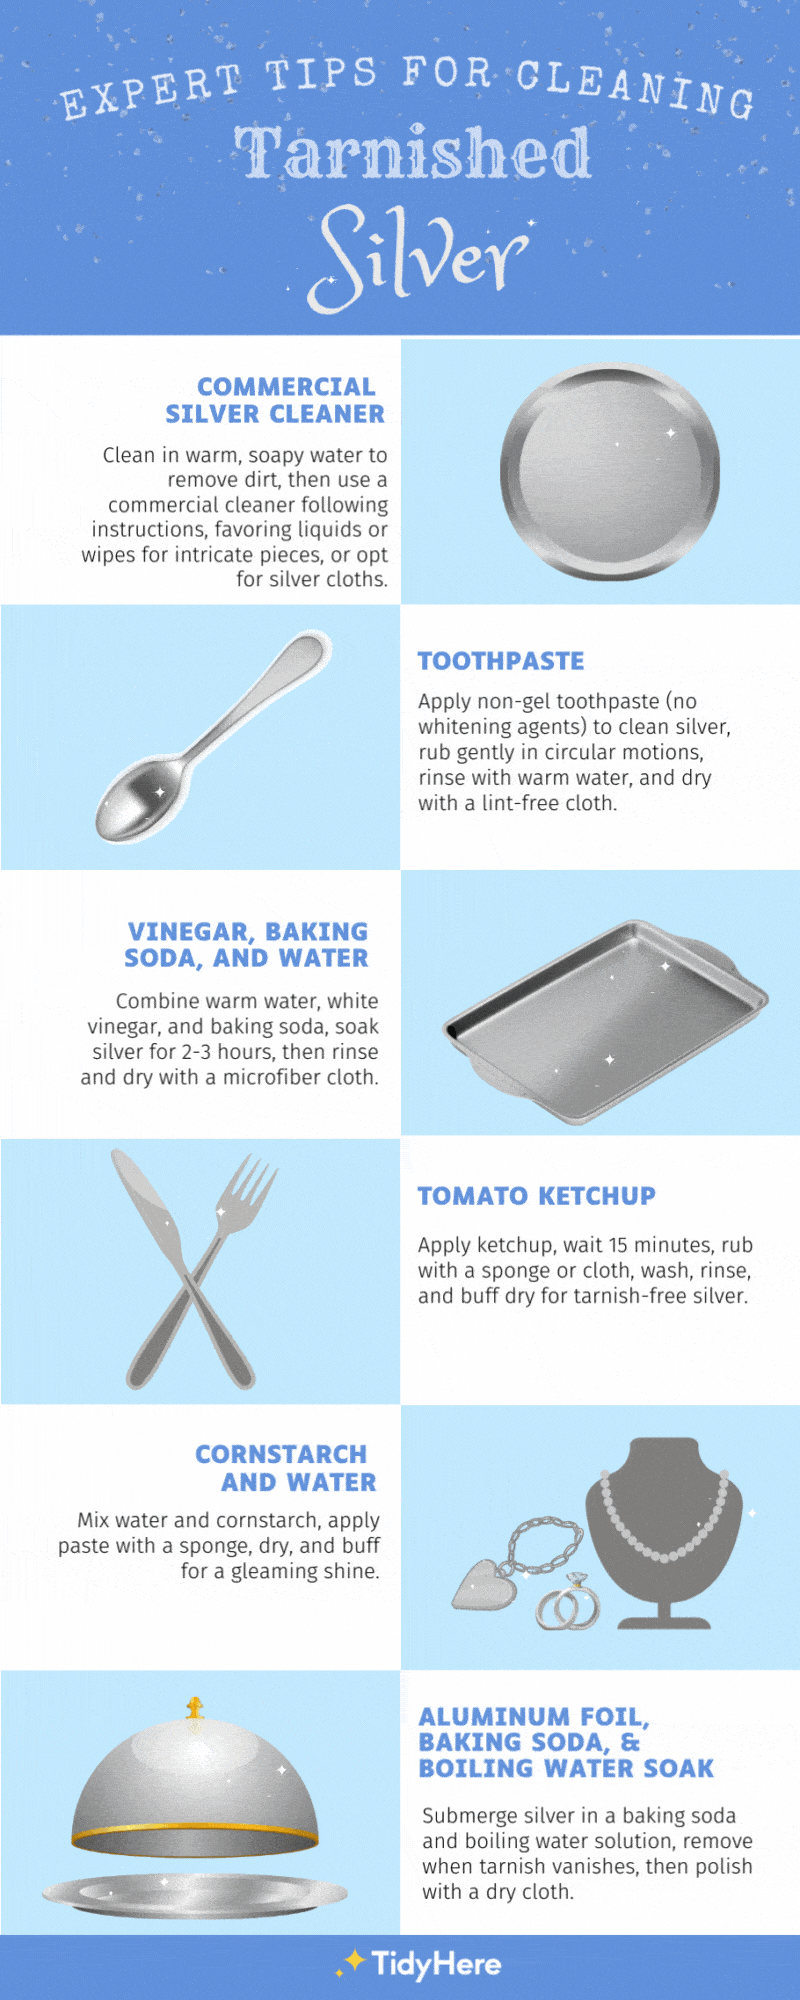 Expert Tips for Cleaning Tarnished Silver Tidyhere Infographic